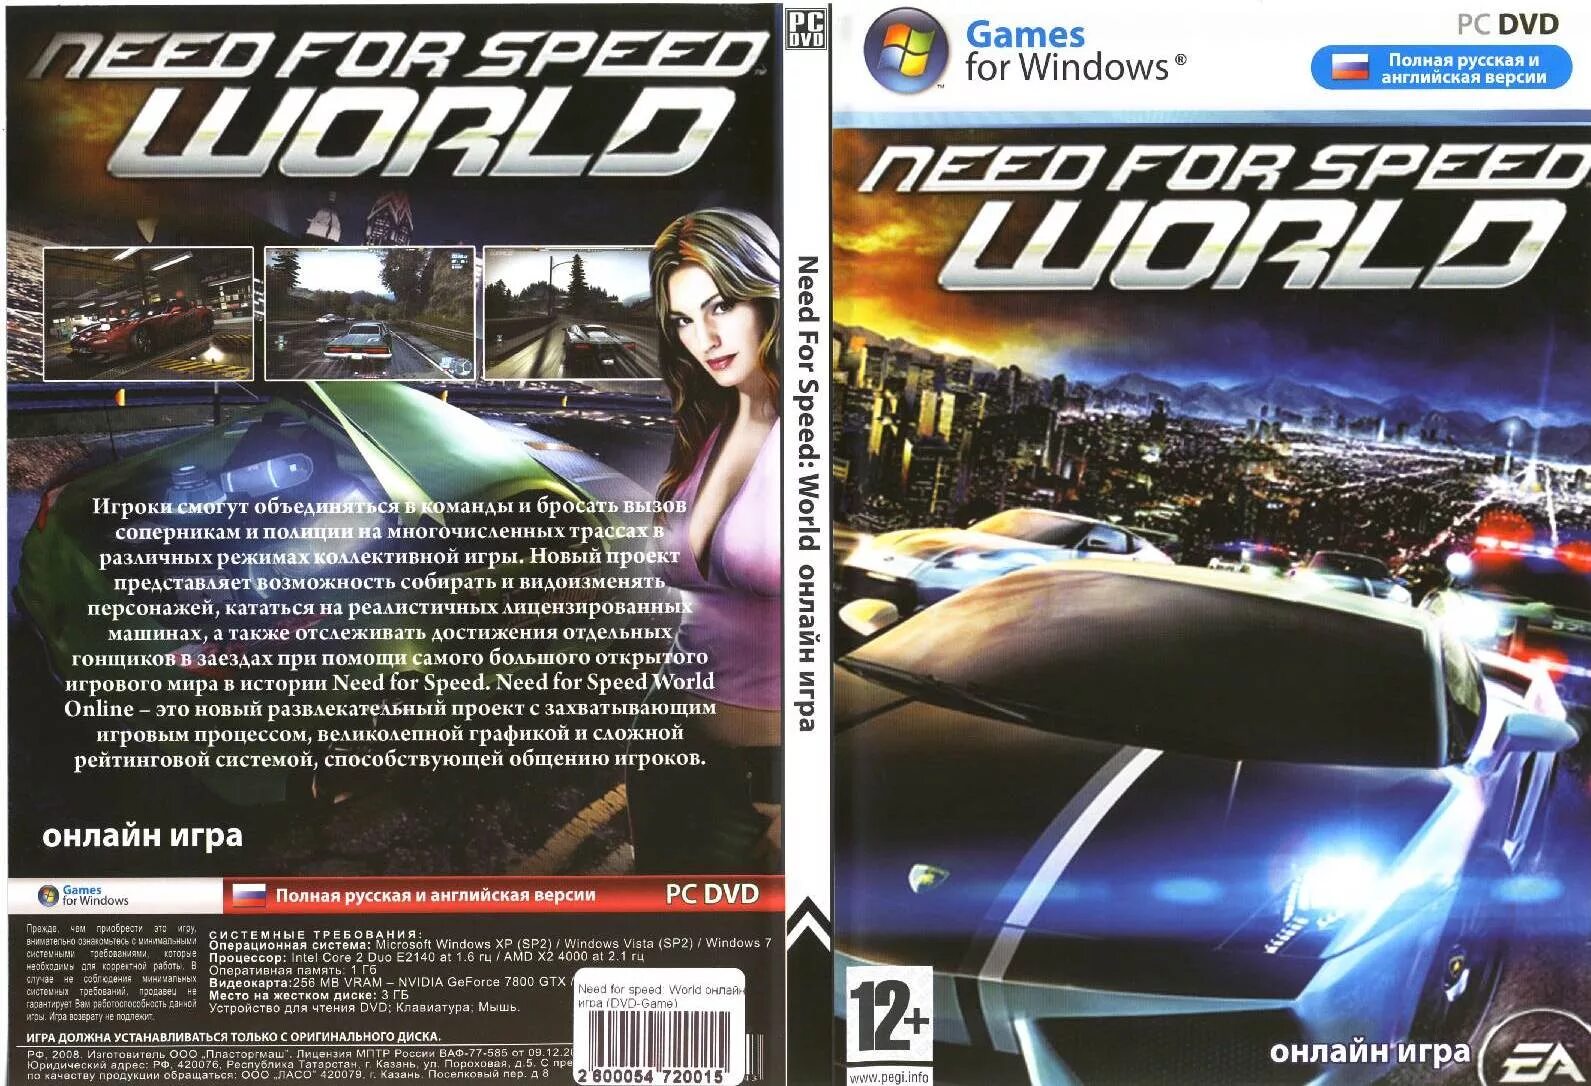 Ned for Speed PLAYSTATION 1 обложка диска. Need for Speed антология обложка. Приставка Wii need for Speed. Диск РС 1999 NFS. Антология need